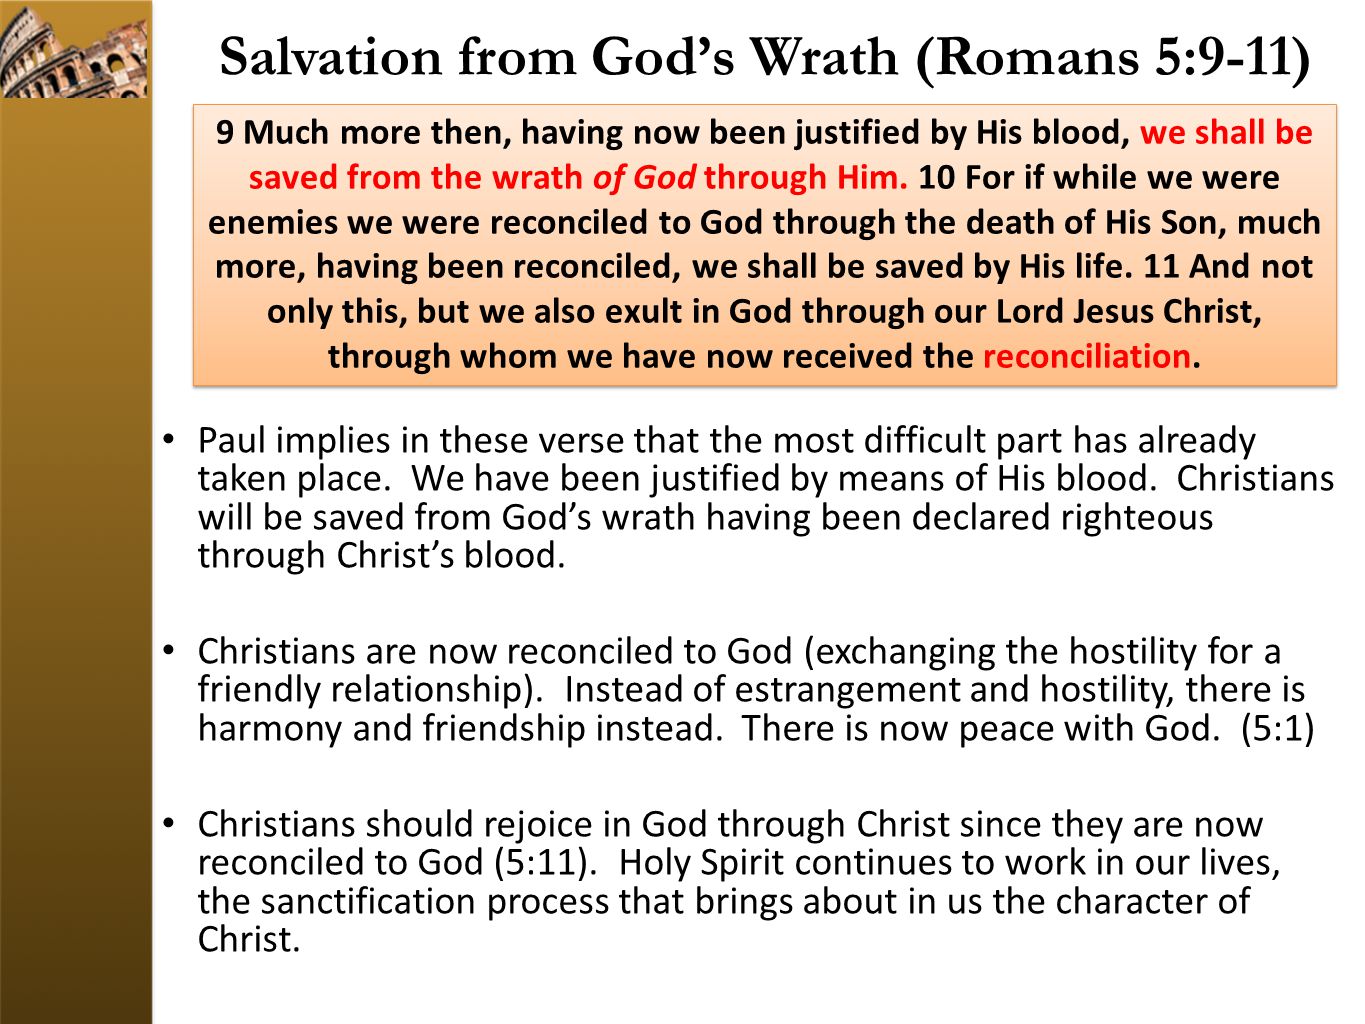 Salvation from God’s Wrath (Romans 5:9-11) Paul implies in these verse that the most difficult part has already taken place.